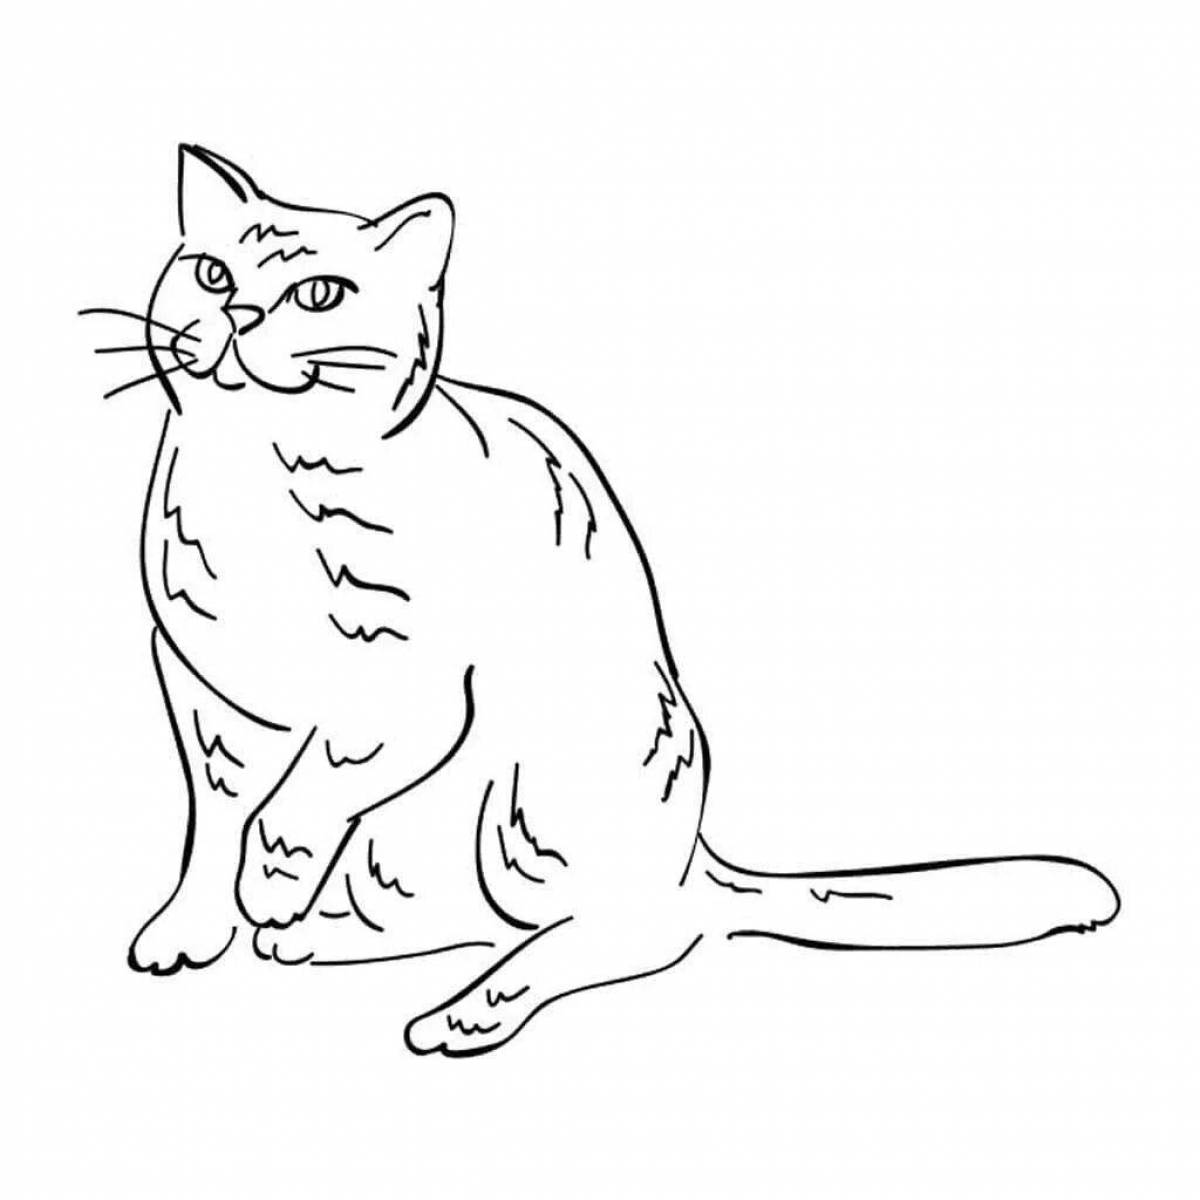 Adorable British cat coloring page